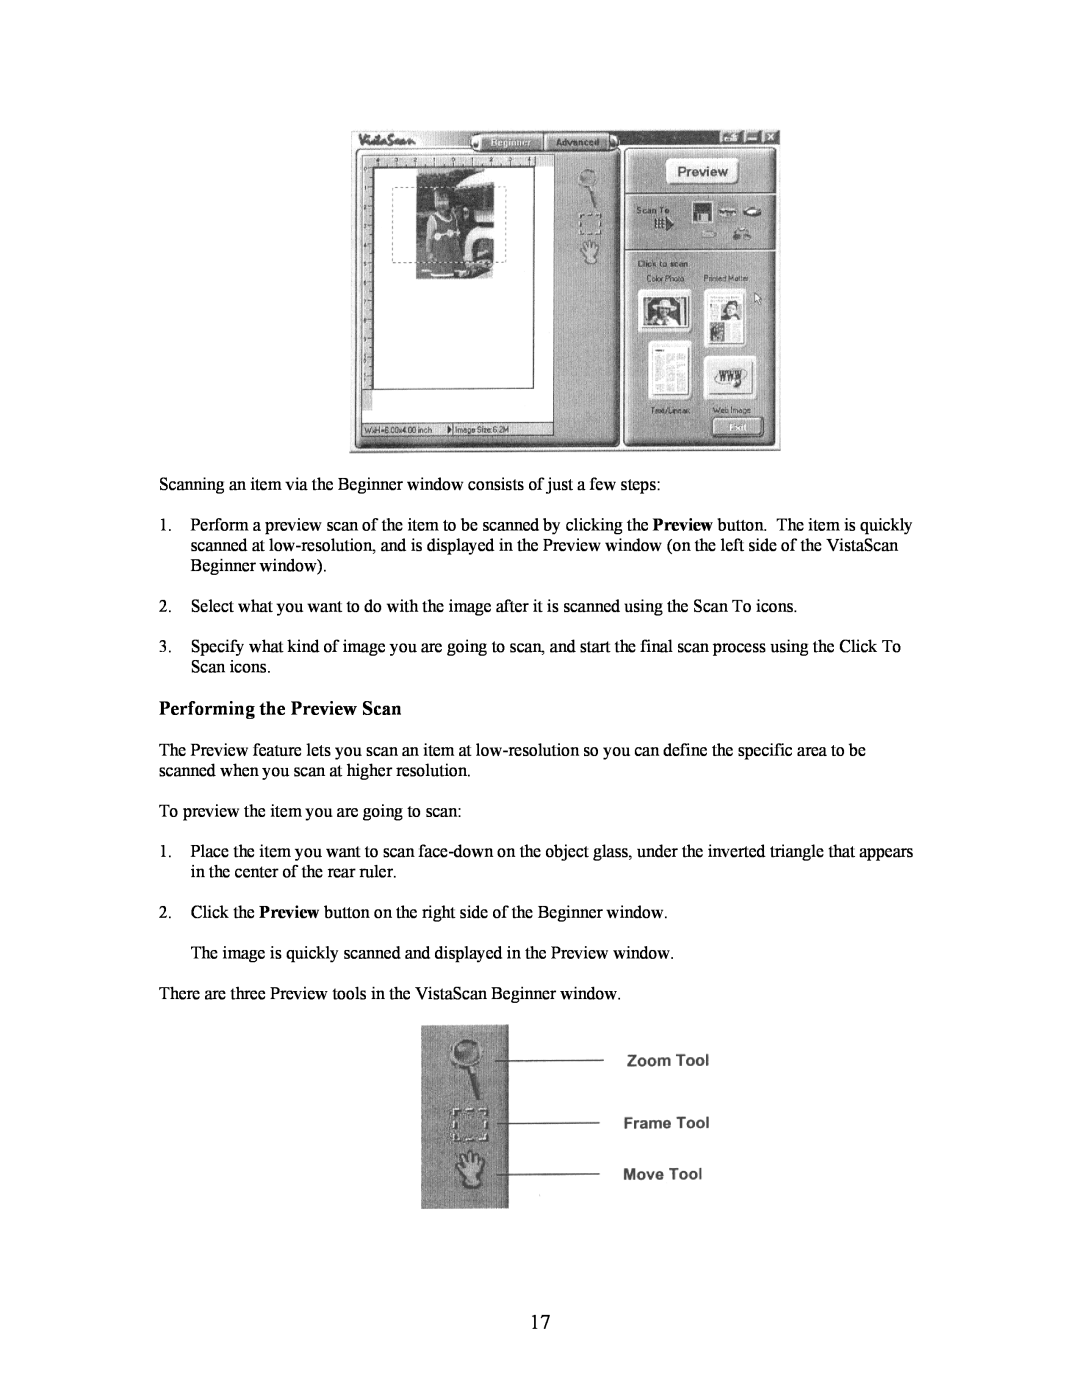 UMAX Technologies 3450, Astra 3400 owner manual Performing the Preview Scan 